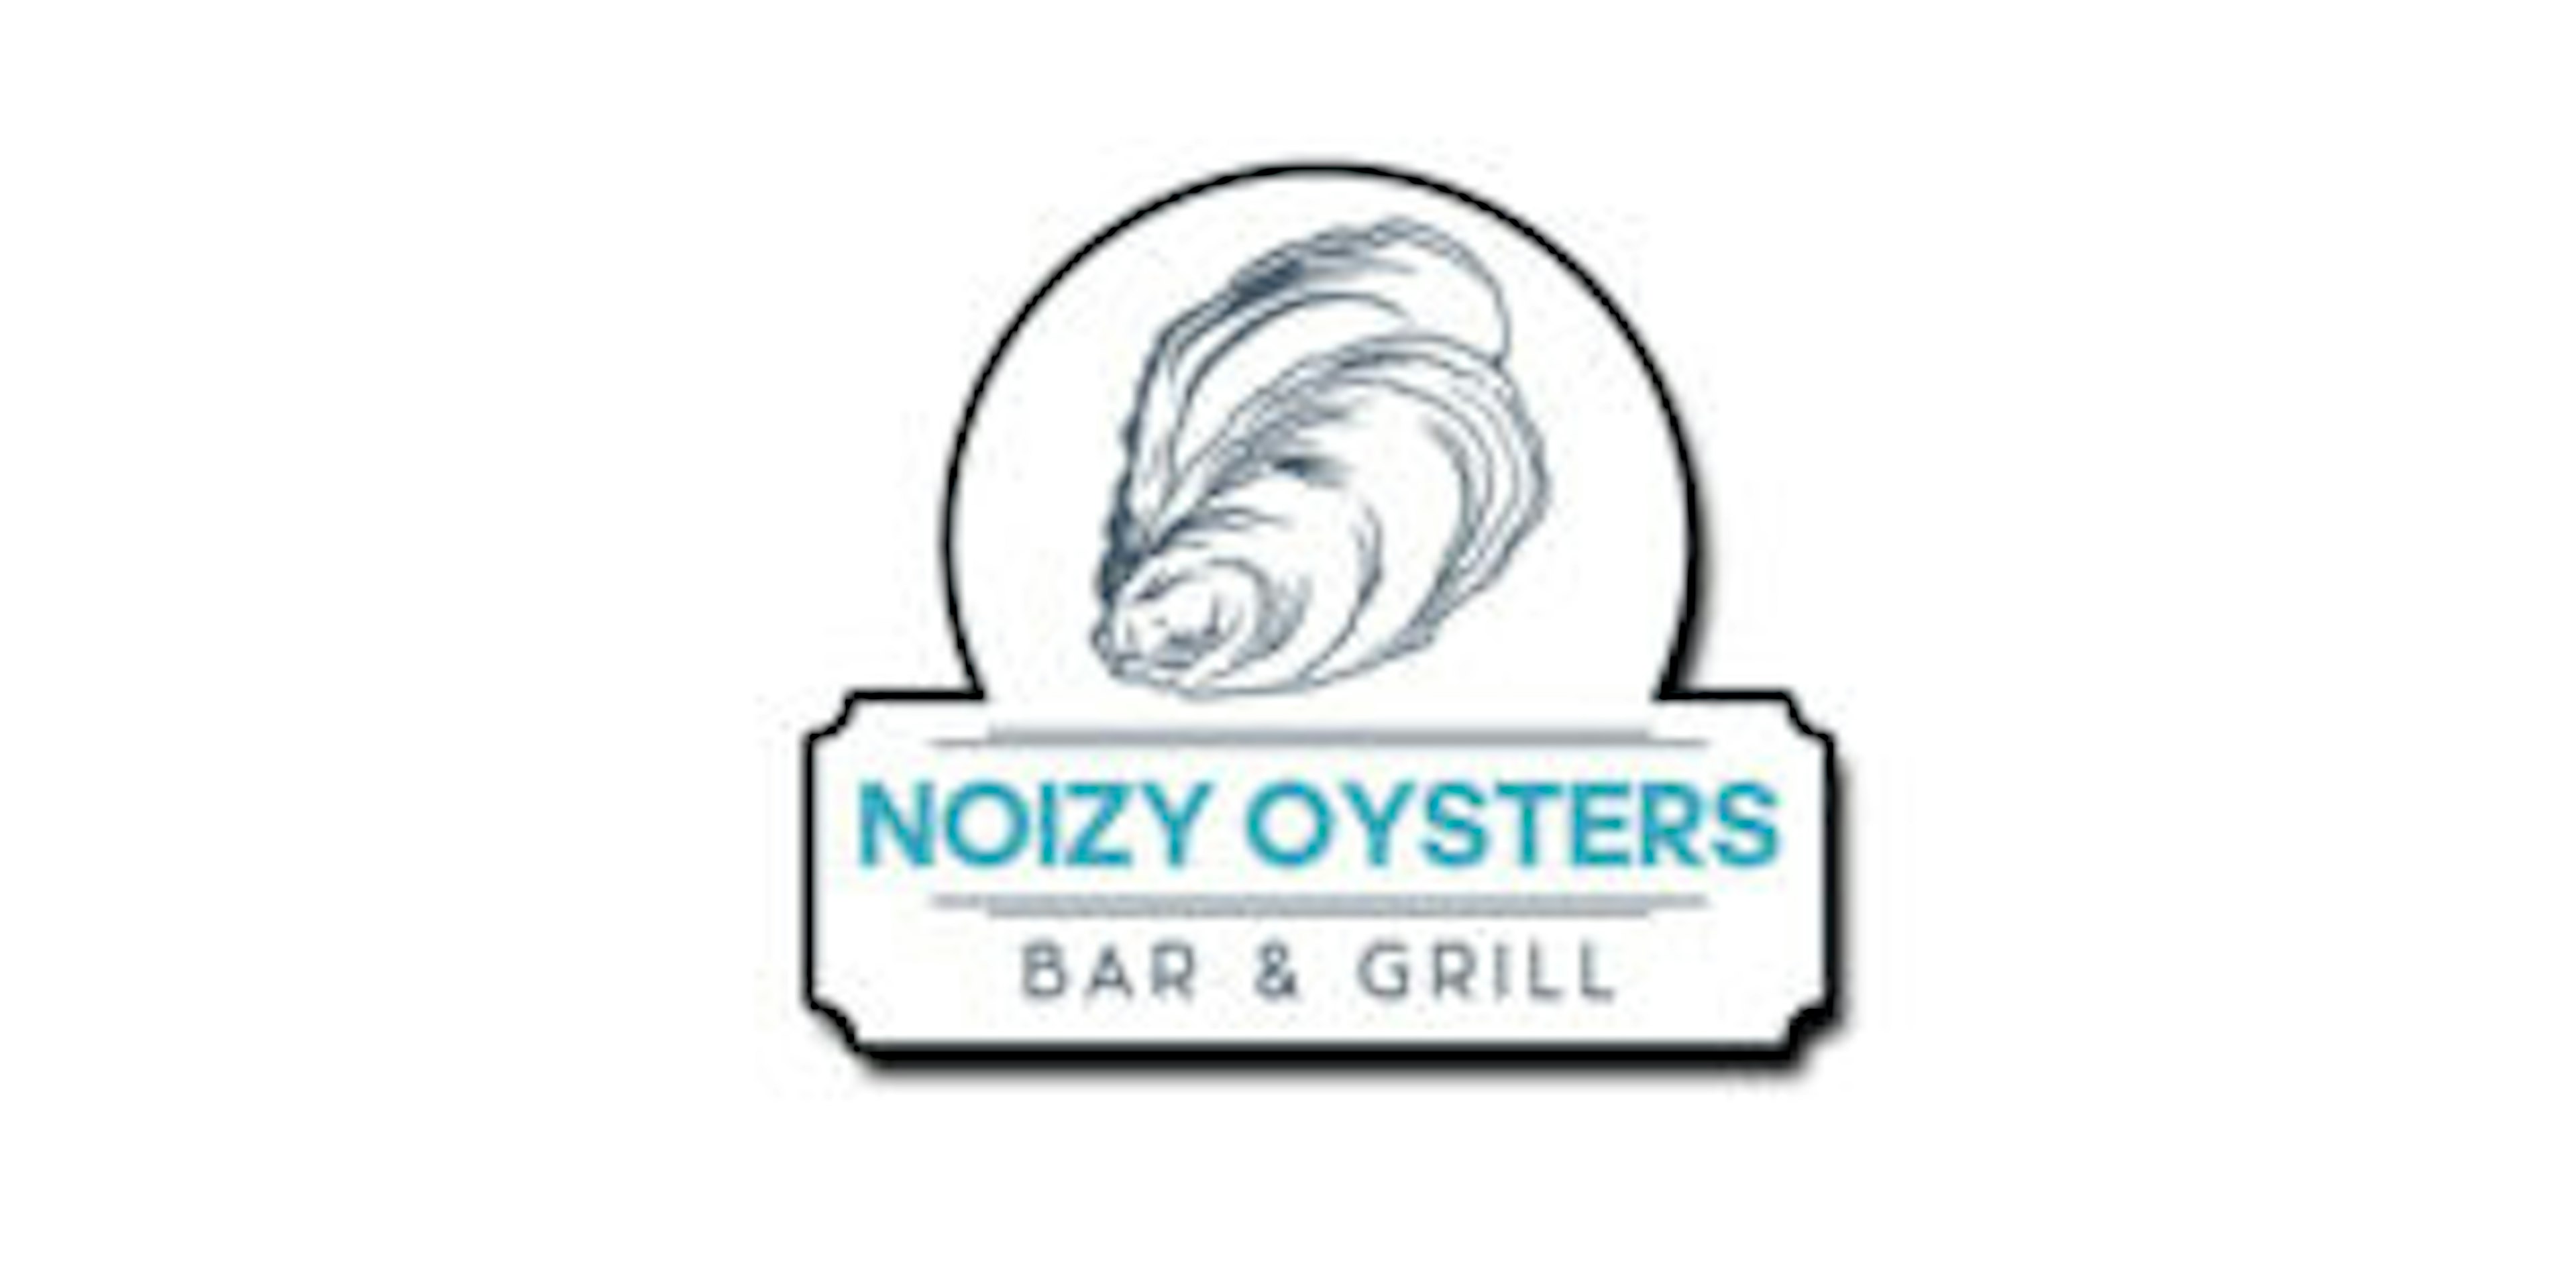 Noizy Oysters Bar & Grill